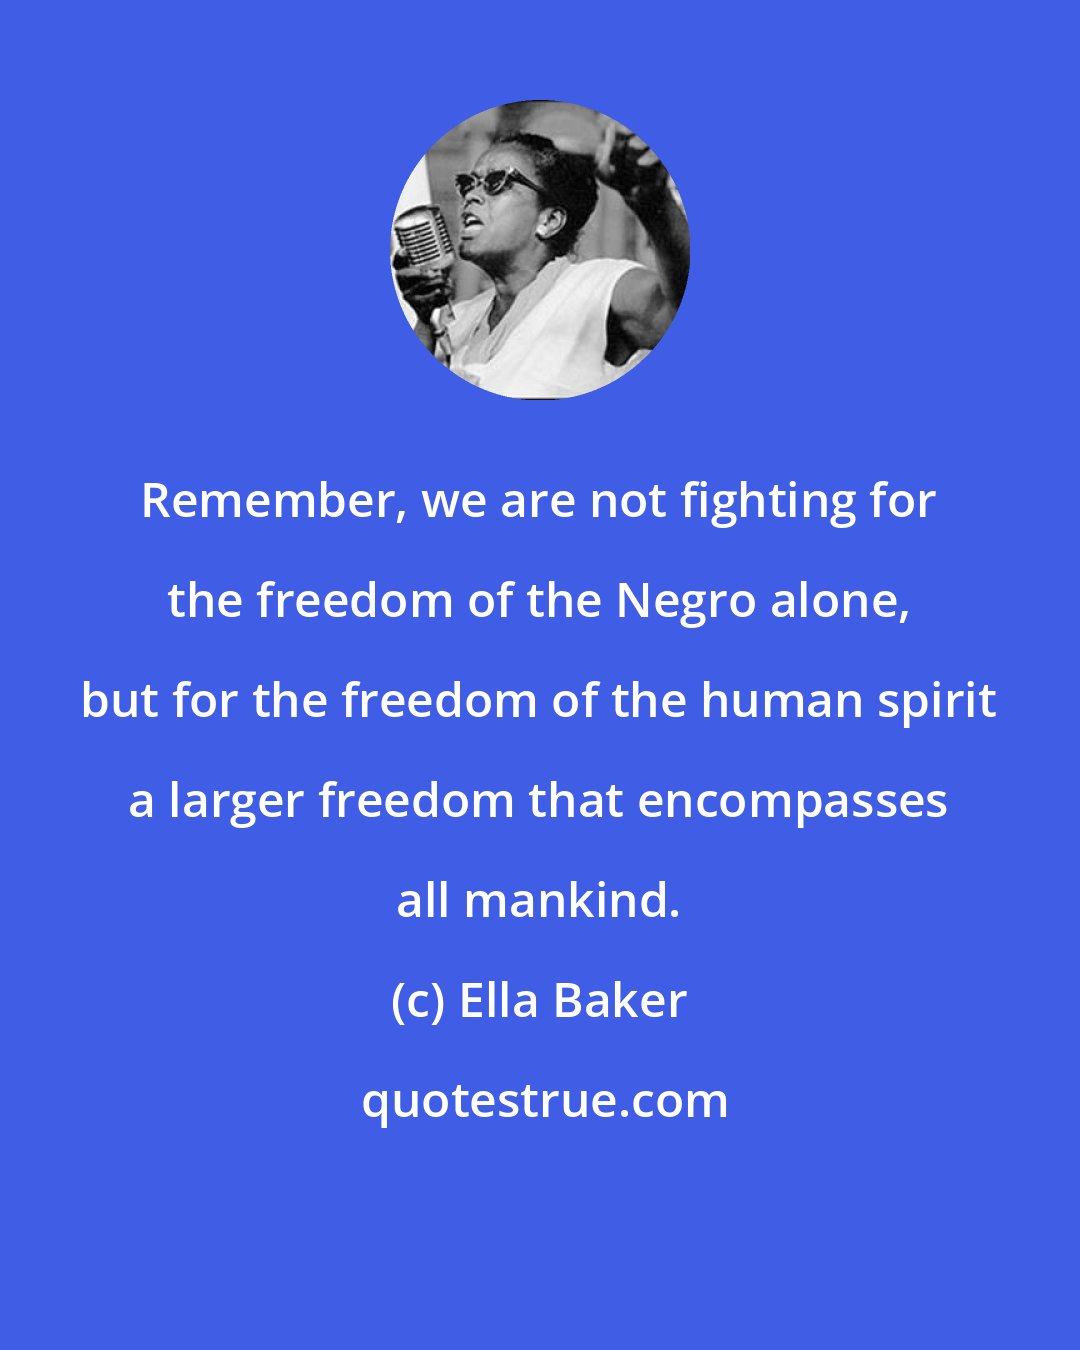 Ella Baker: Remember, we are not fighting for the freedom of the Negro alone, but for the freedom of the human spirit a larger freedom that encompasses all mankind.